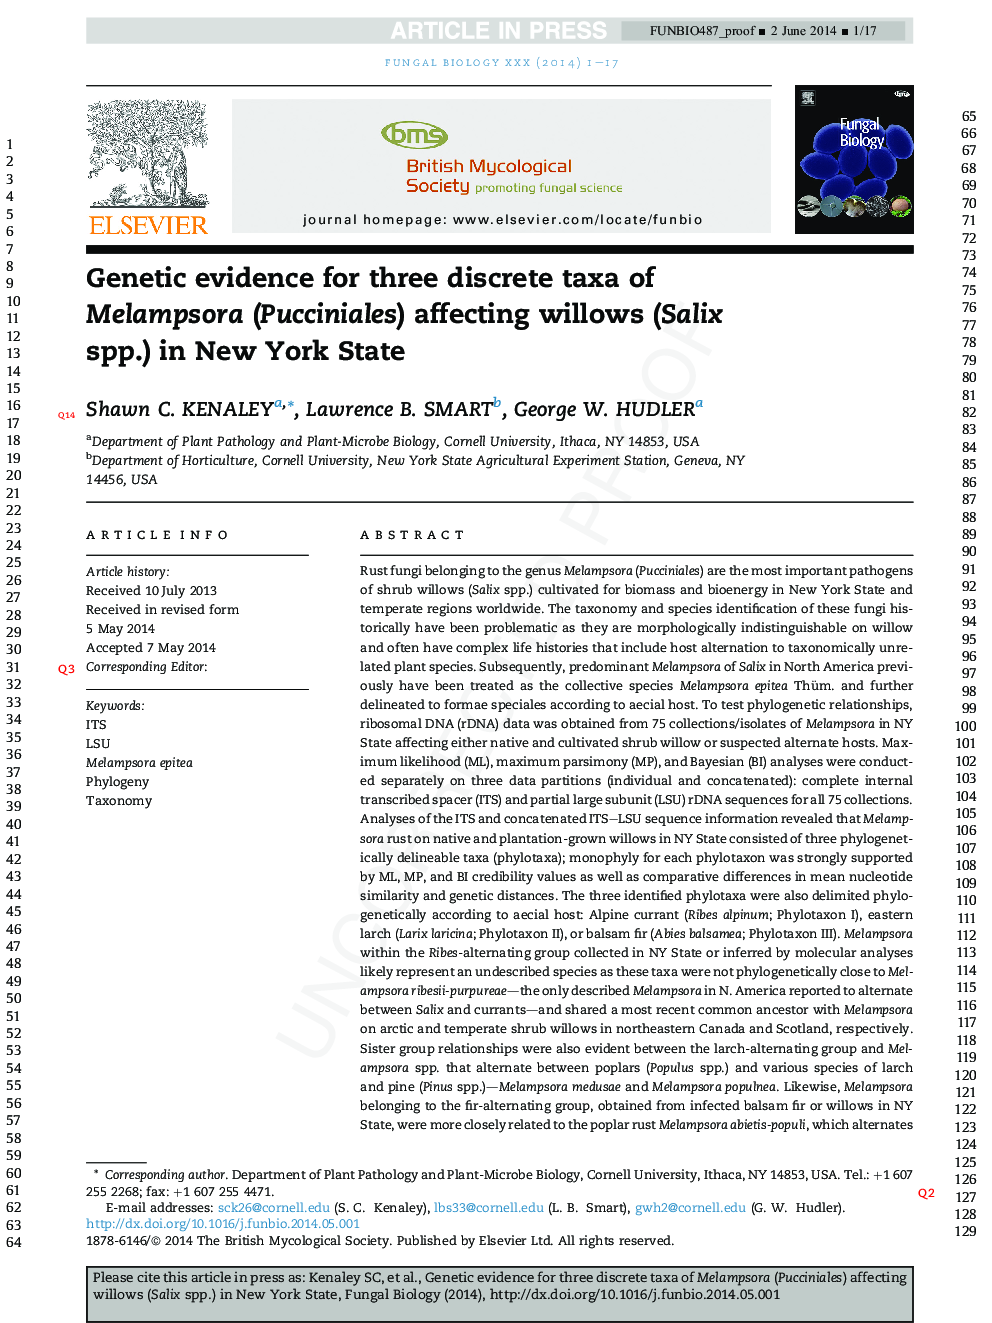 Genetic evidence for three discrete taxa of Melampsora (Pucciniales) affecting willows (Salix spp.) in New York State